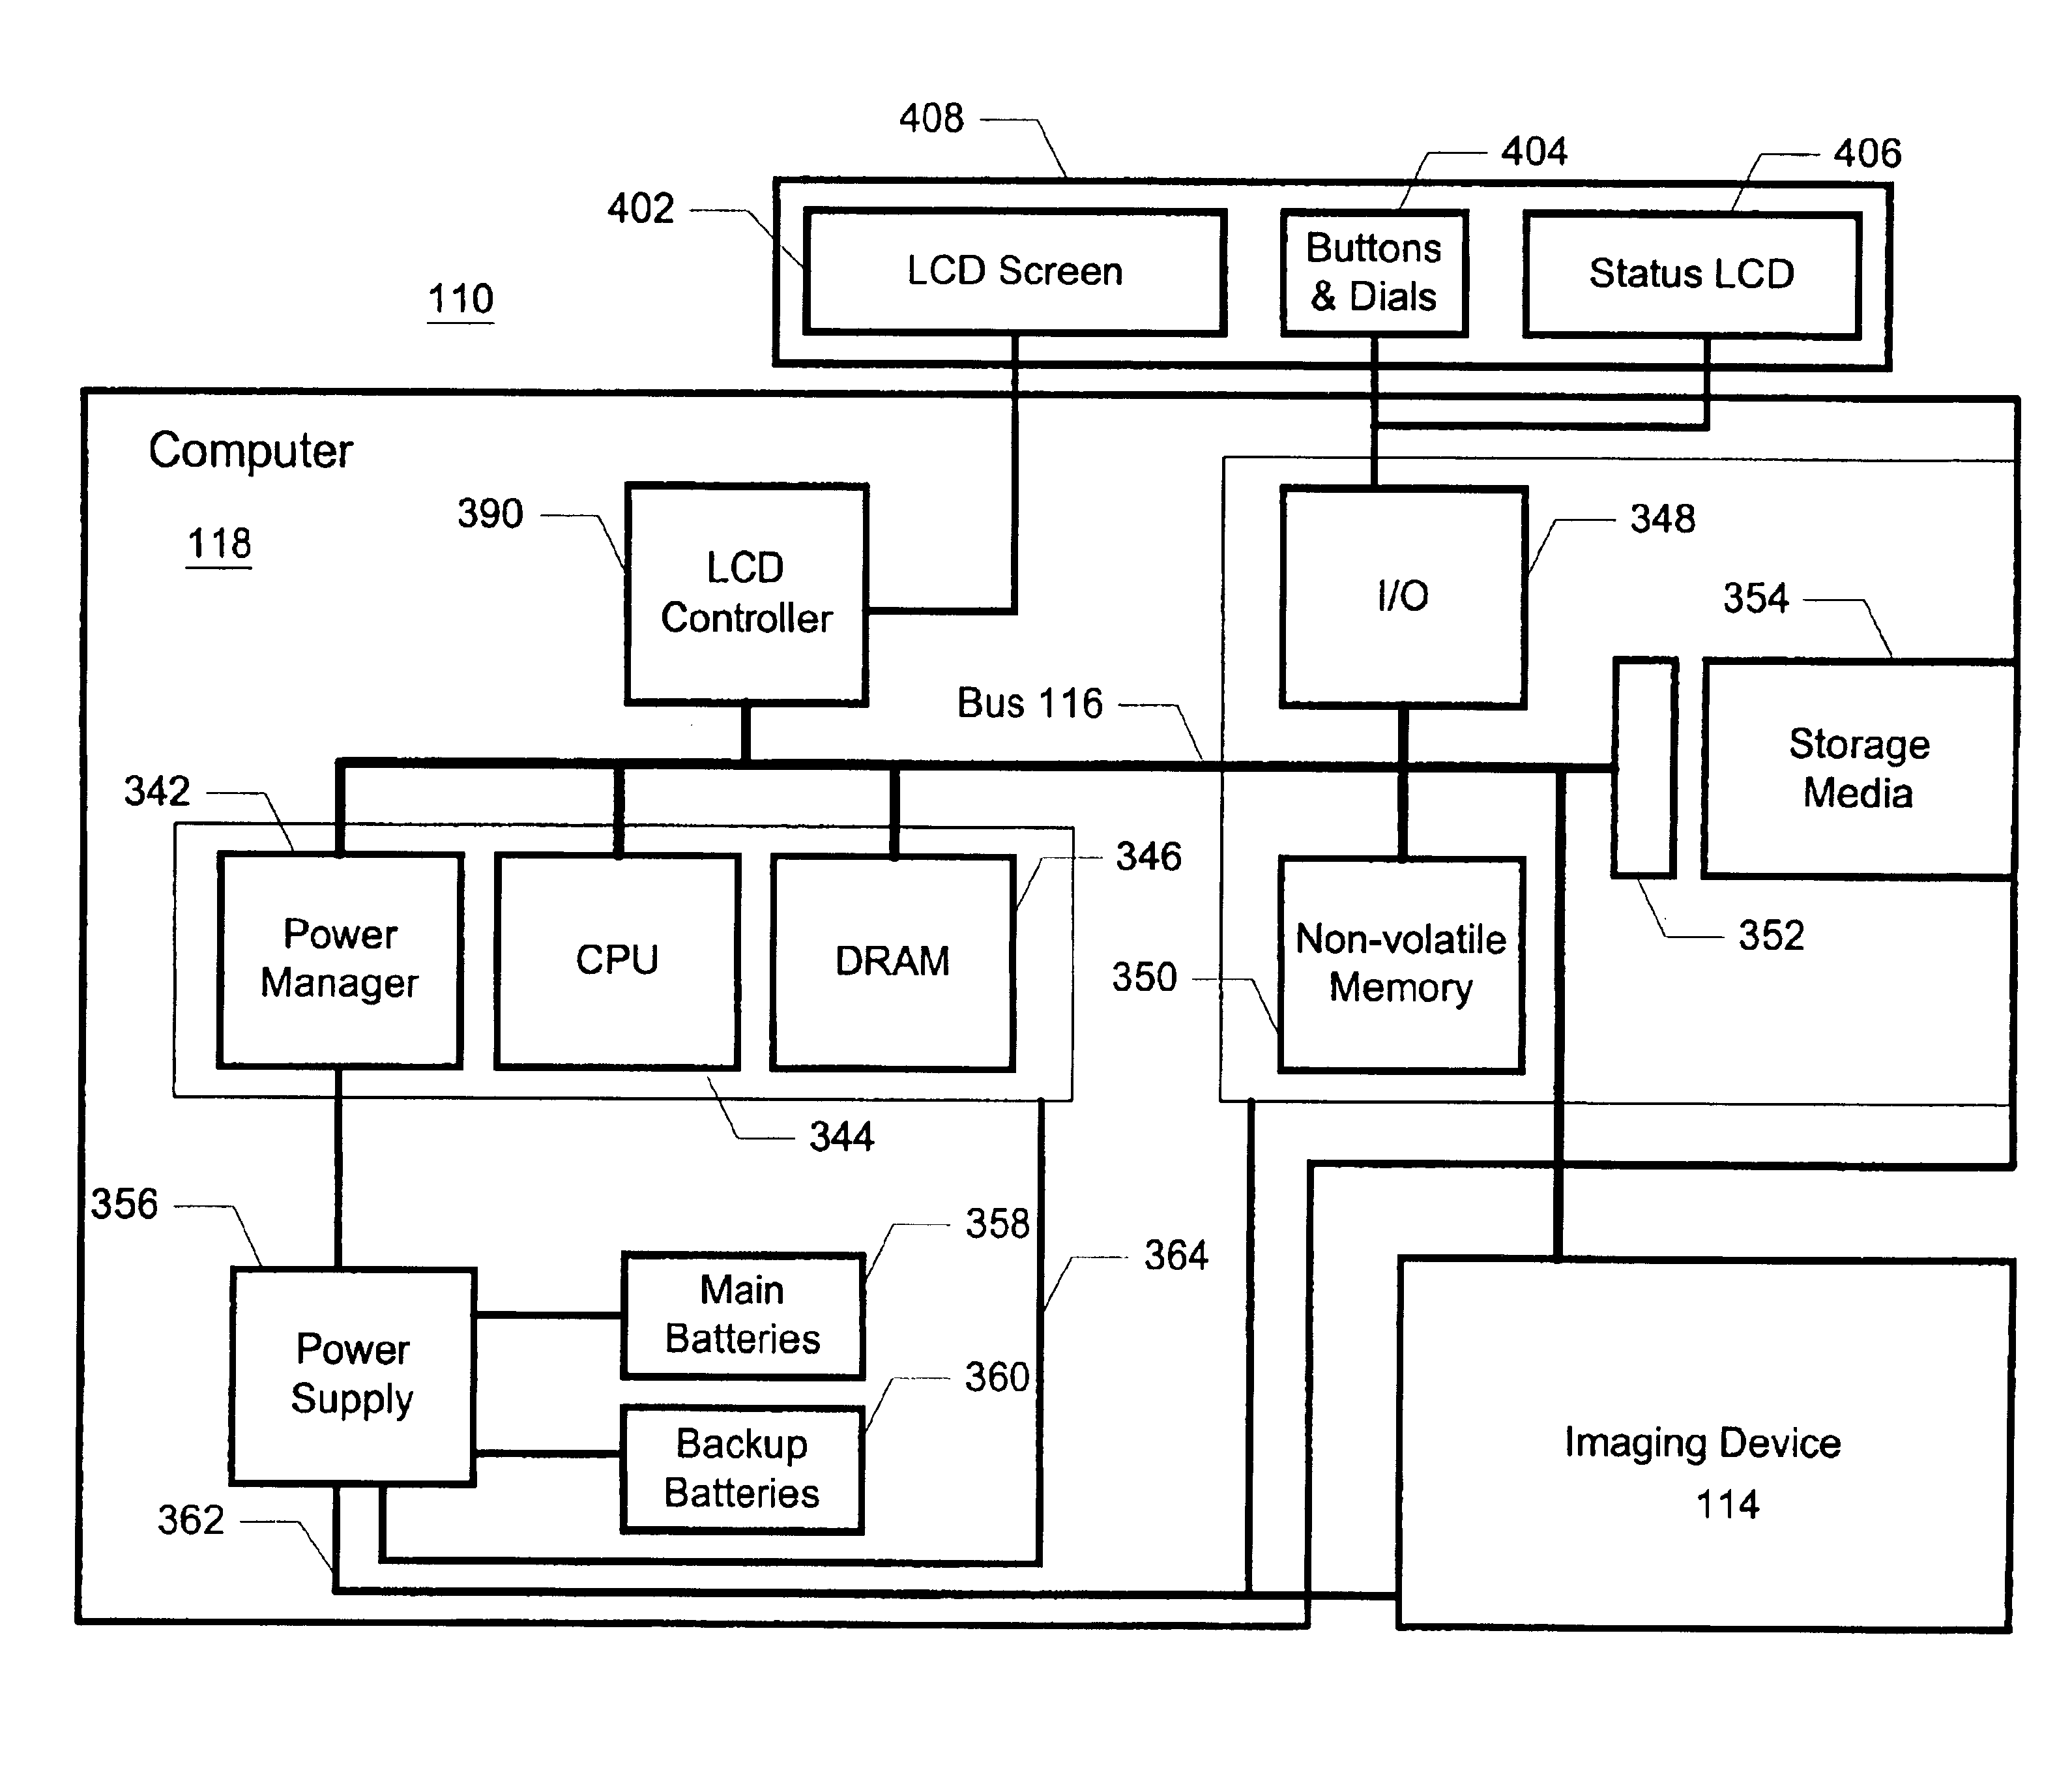 Method and apparatus for managing image categories in a digital camera to enhance performance of a high-capacity image storage media